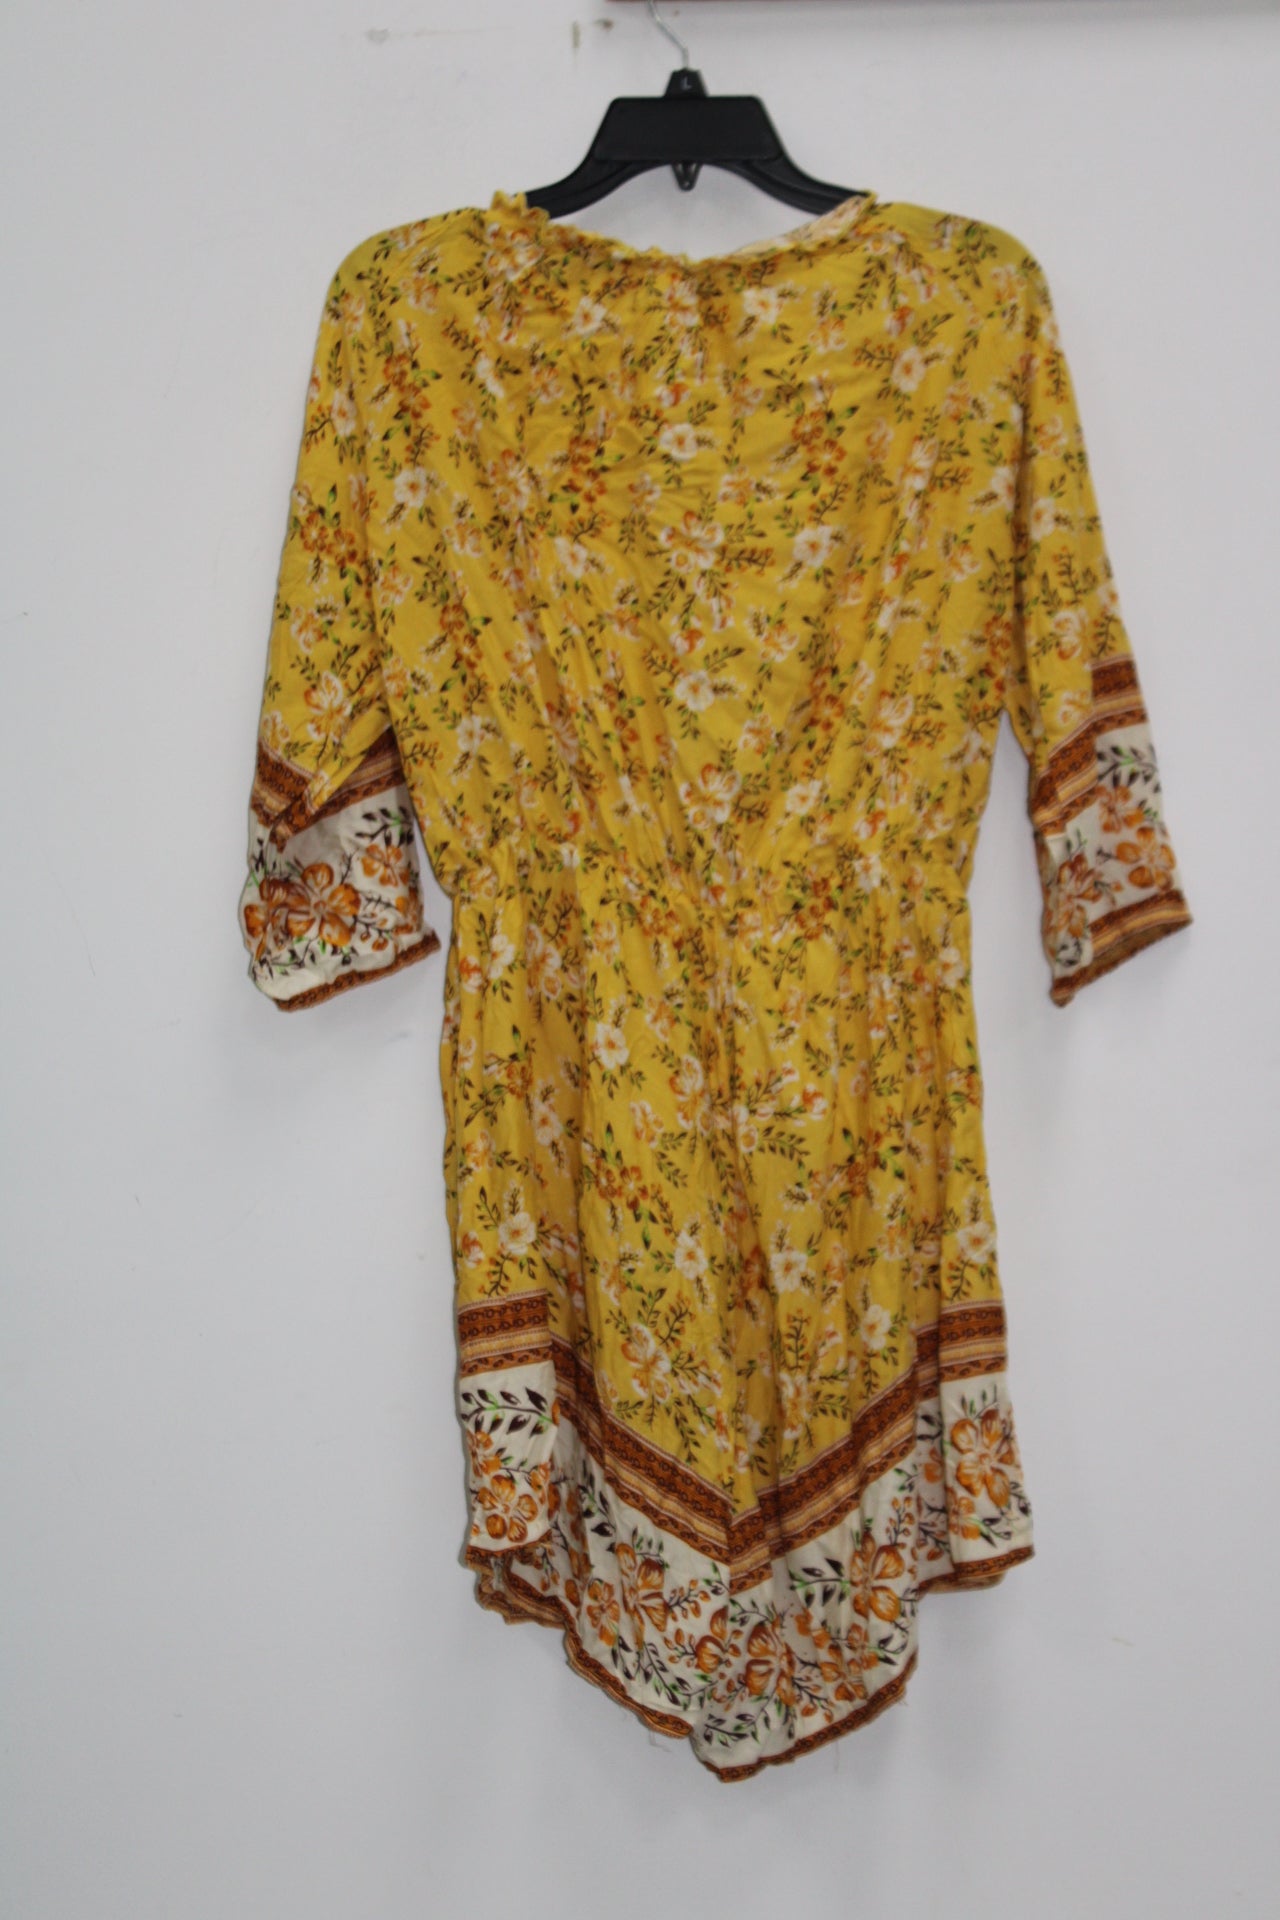 GAOVOT WOMEN FLORAL SUMMER ROMPER, YELLOW, SIZE LARGE- NEW WITHOUT TAG 11781